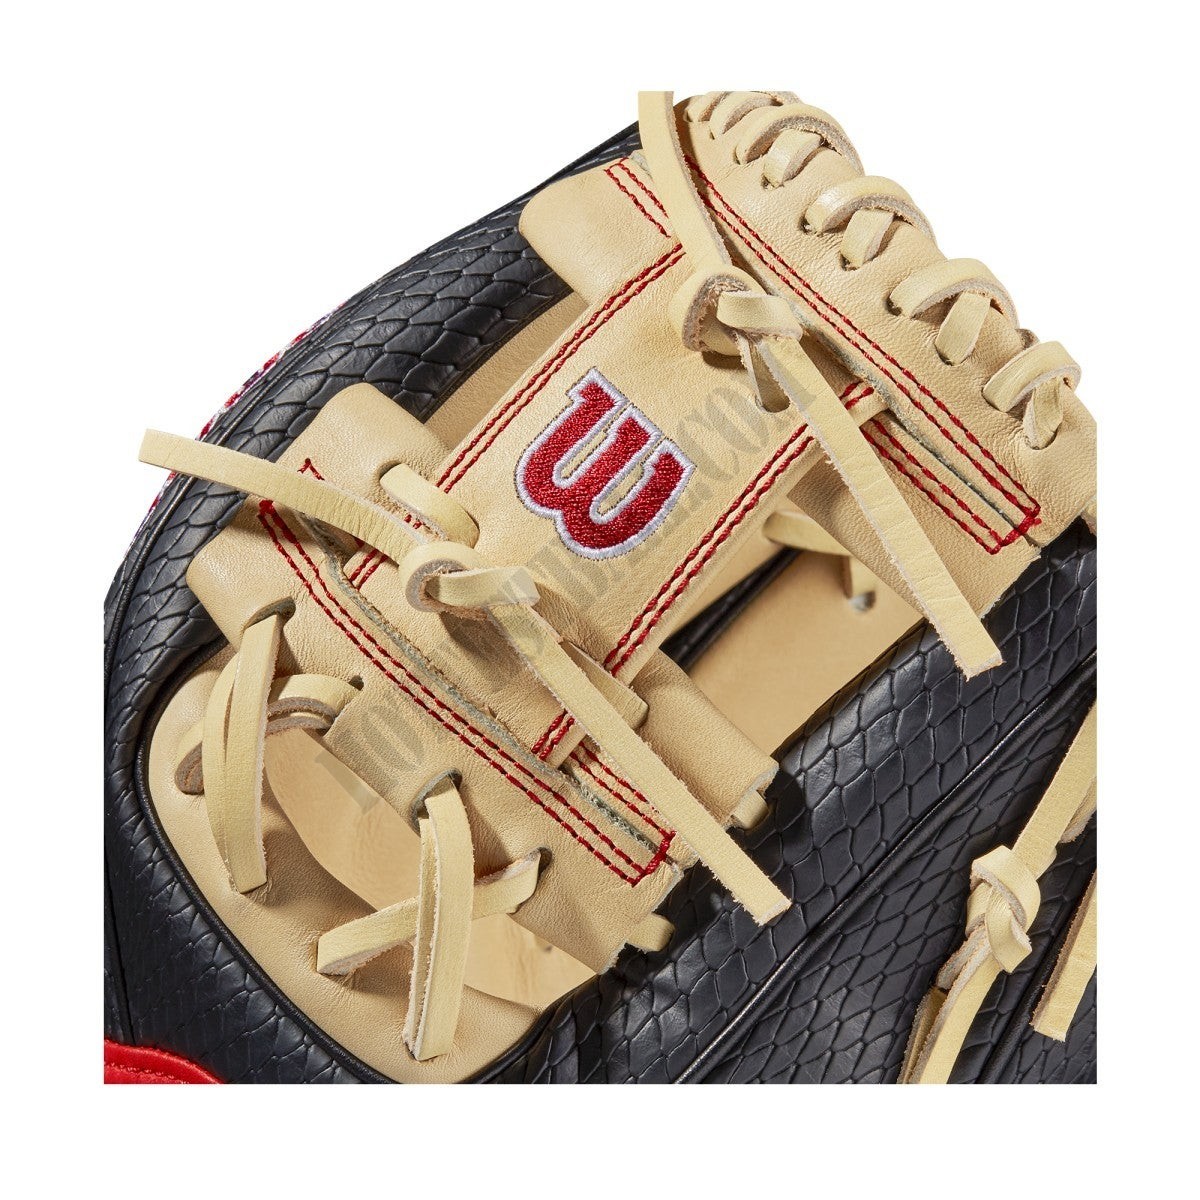 2021 A2000 PF88SS 11.25" Pedroia Fit Infield Baseball Glove ● Wilson Promotions - -5